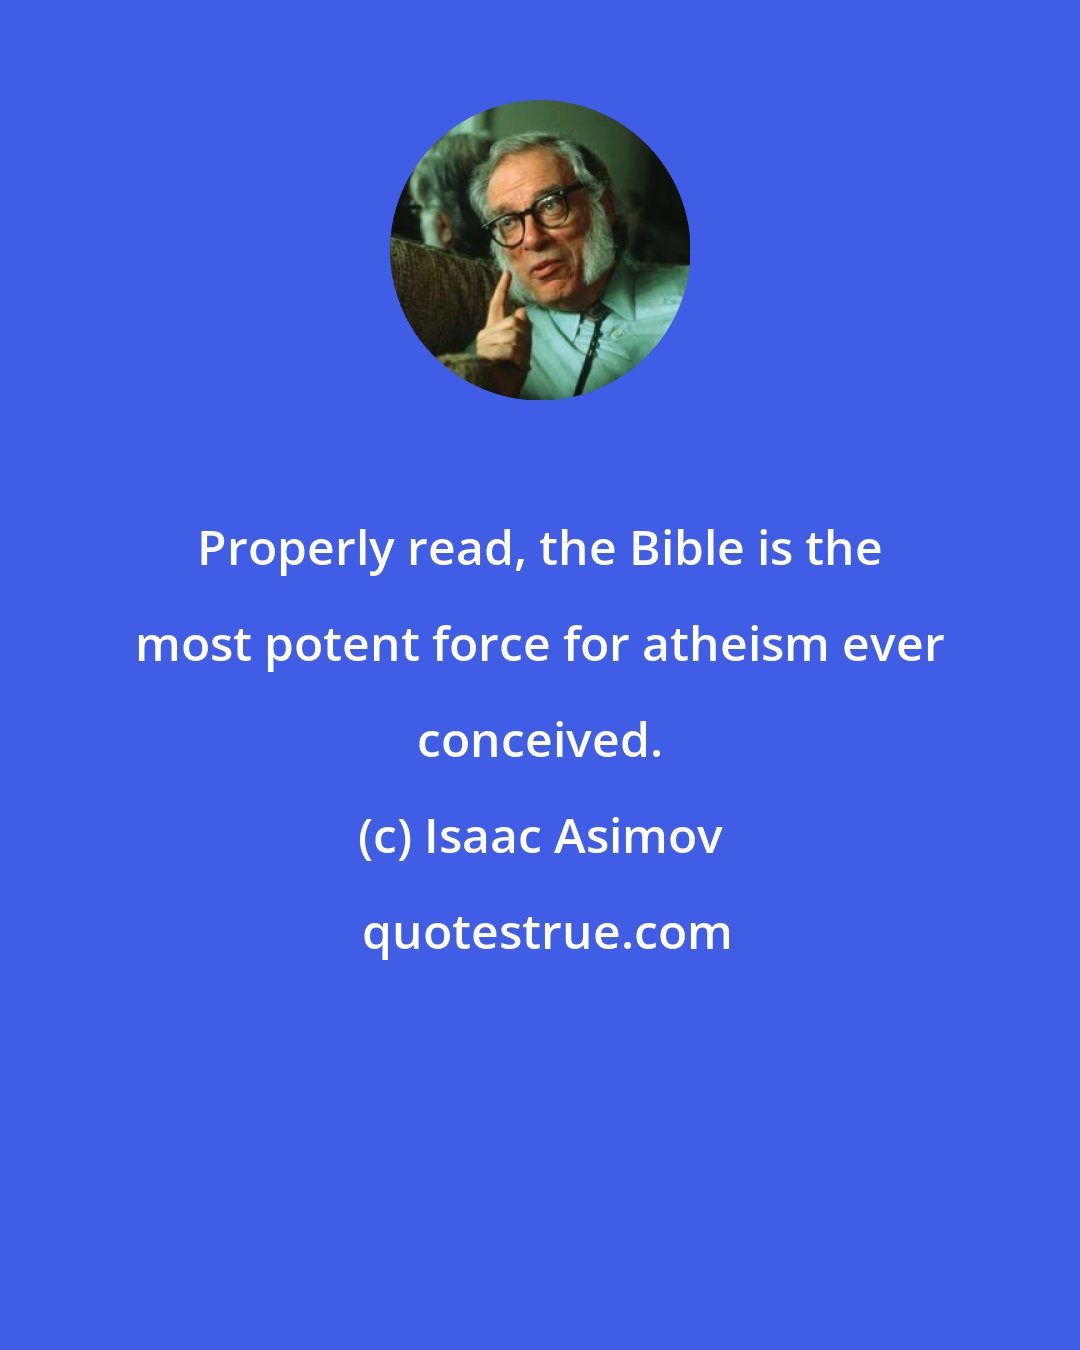 Isaac Asimov: Properly read, the Bible is the most potent force for atheism ever conceived.